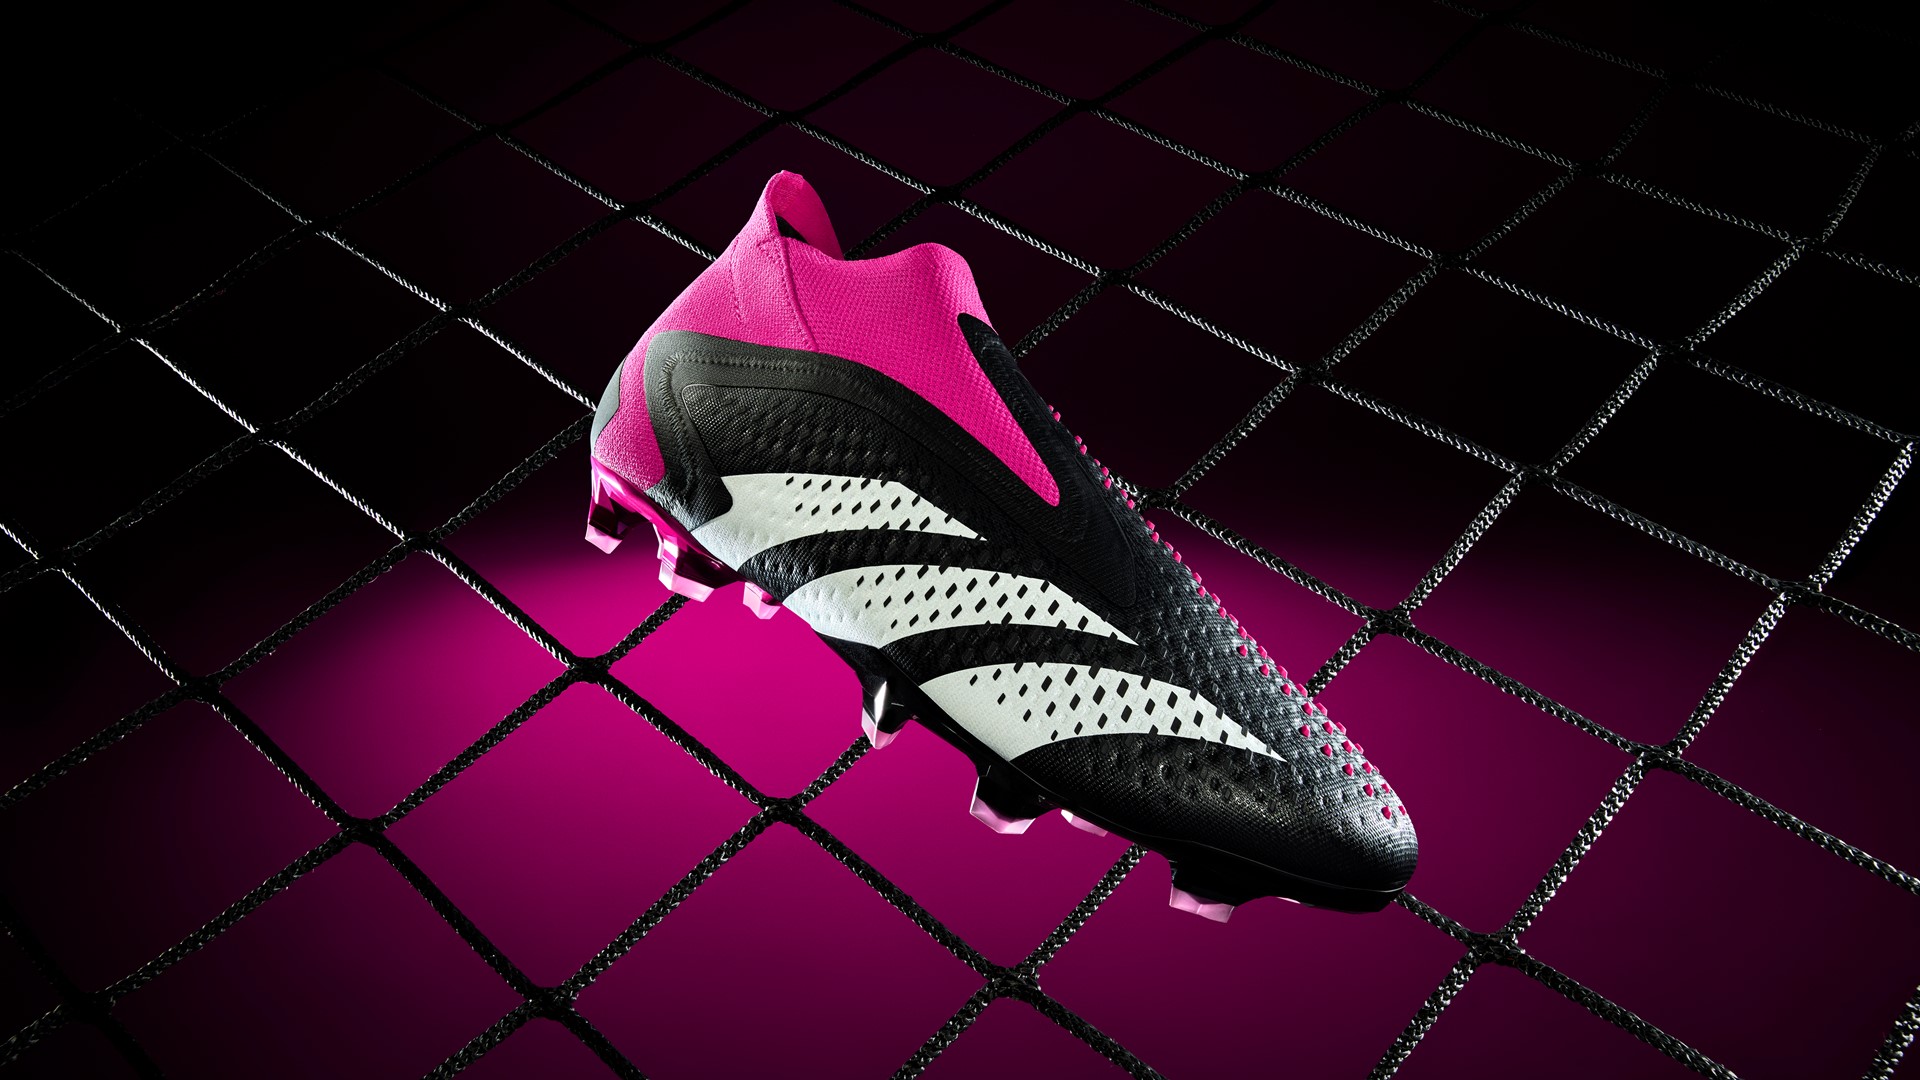 Ambassador Lying missile adidas Takes On-Pitch Accuracy to The Next Level, With the All-New Predator  Accuracy - The Latest Member of The Predator Franchise